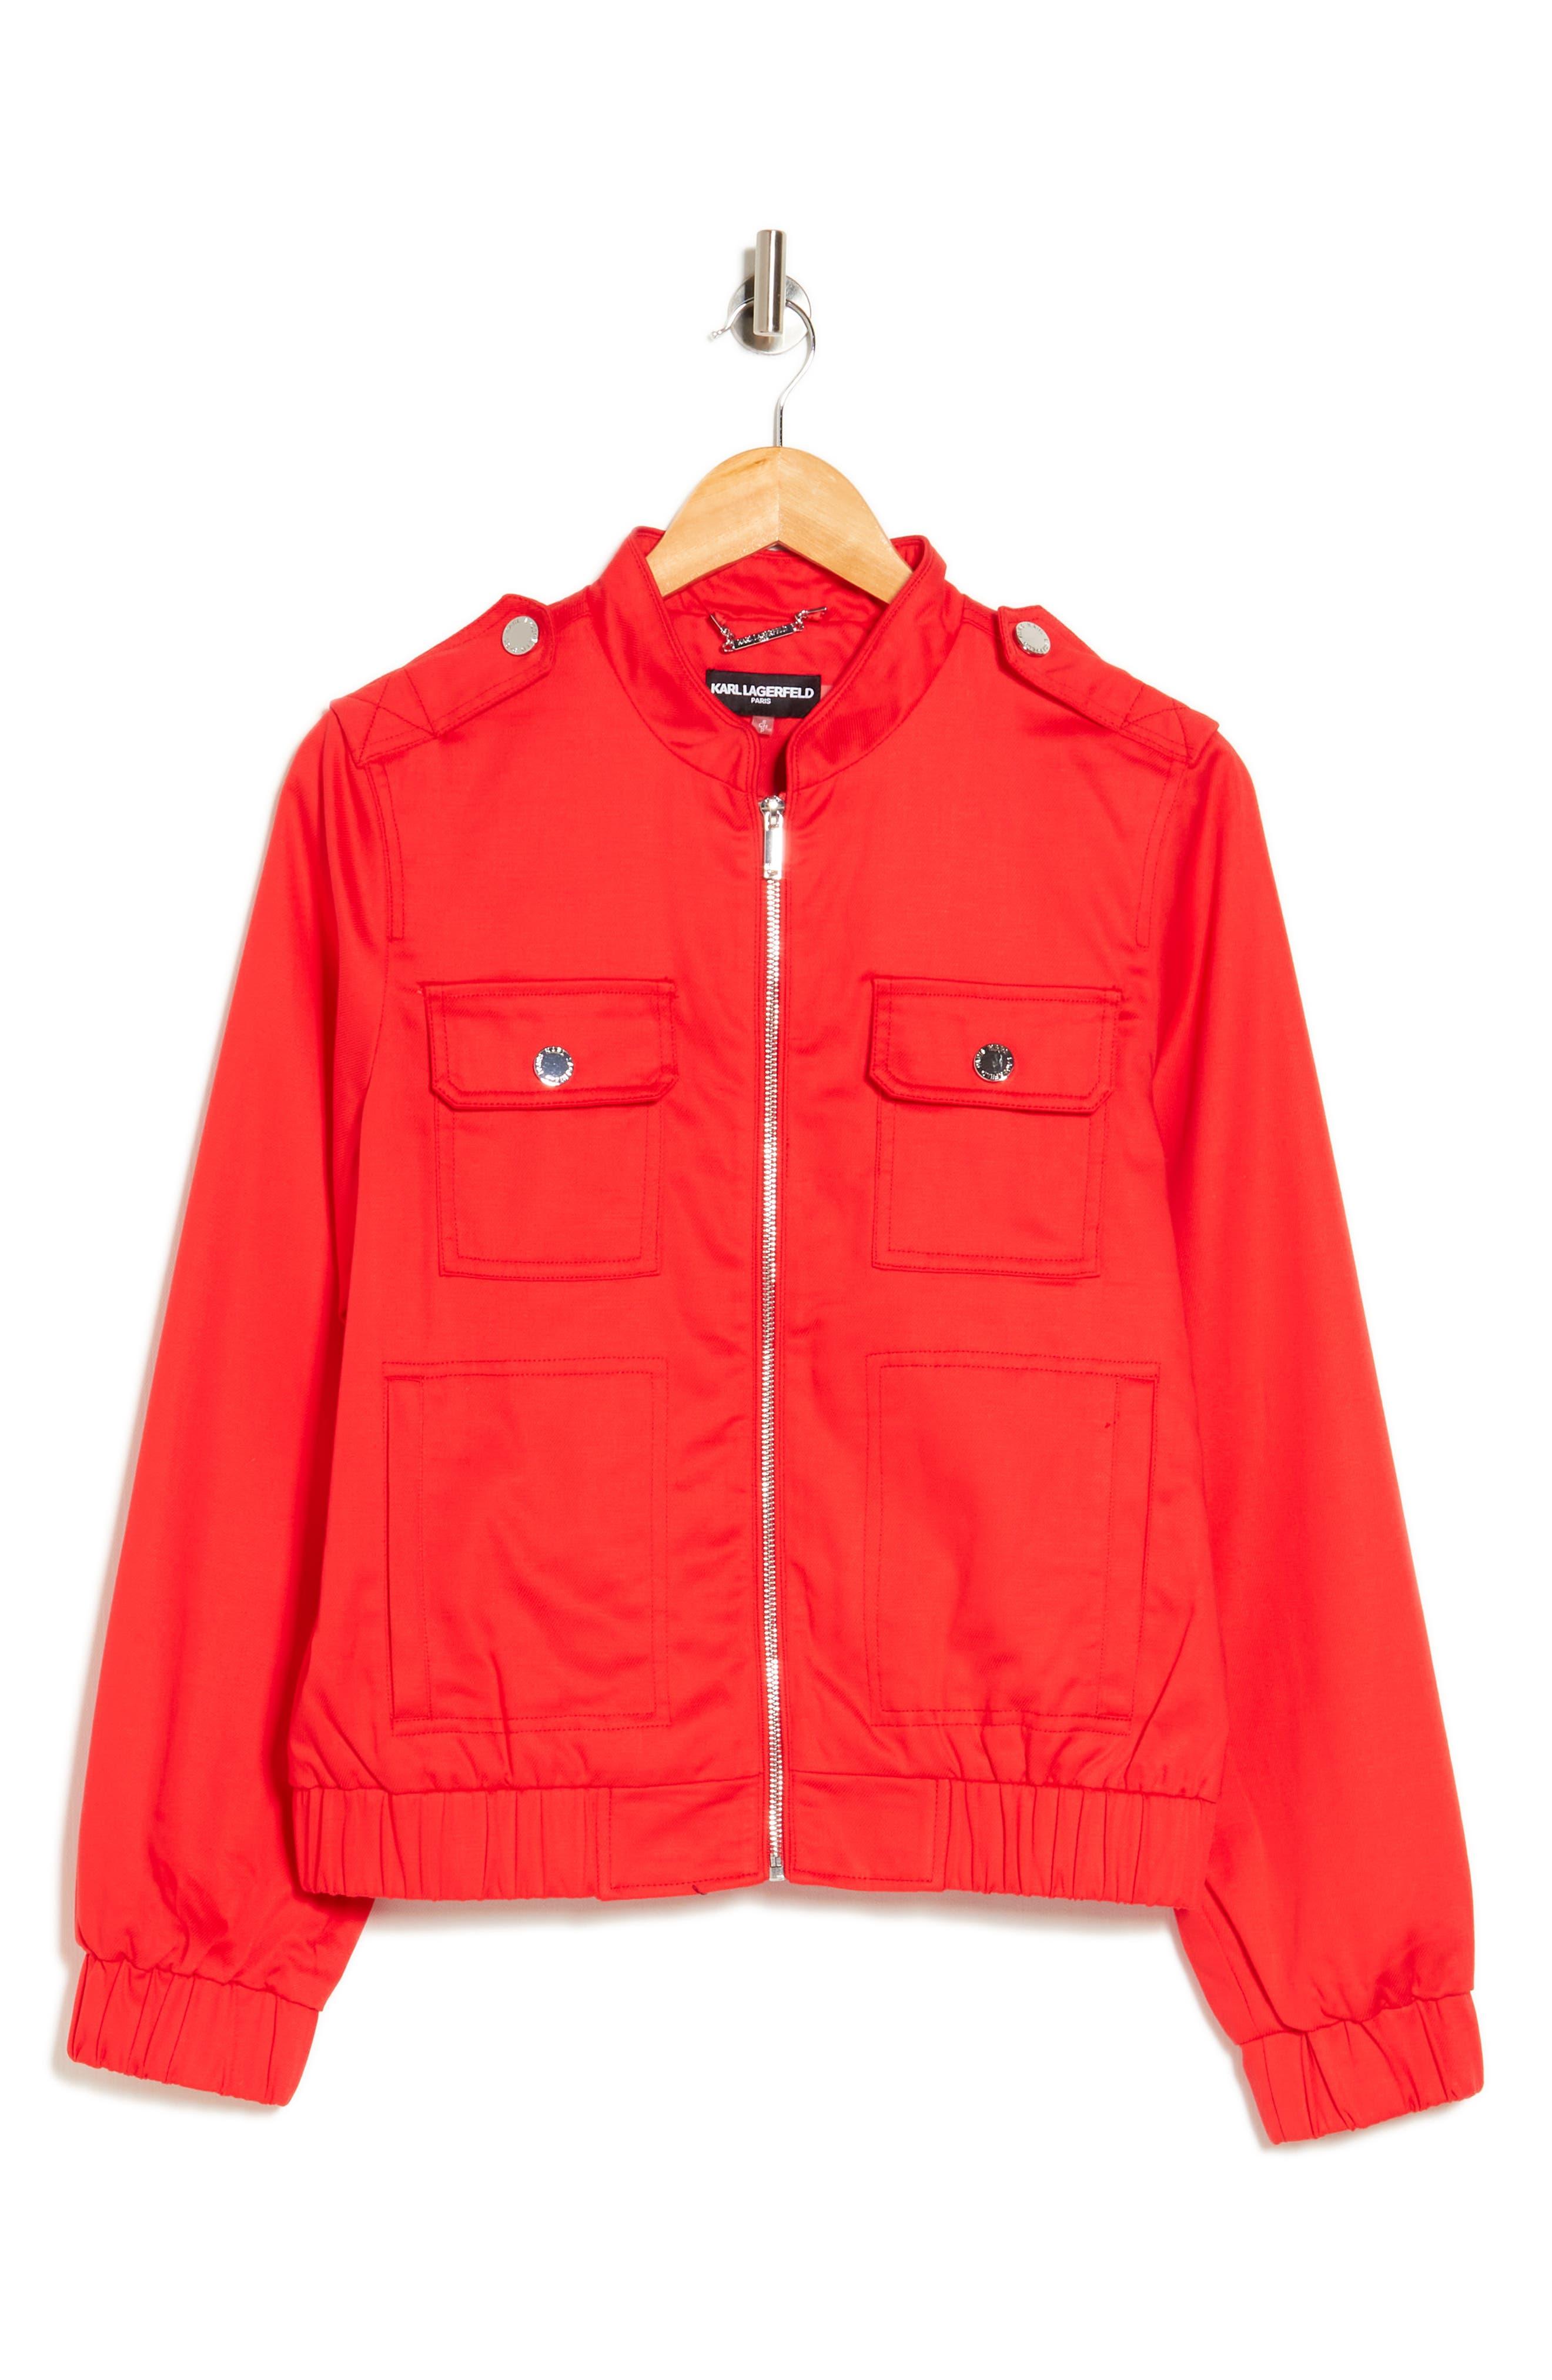 Karl Lagerfeld Twill Bomber Jacket in Red | Lyst